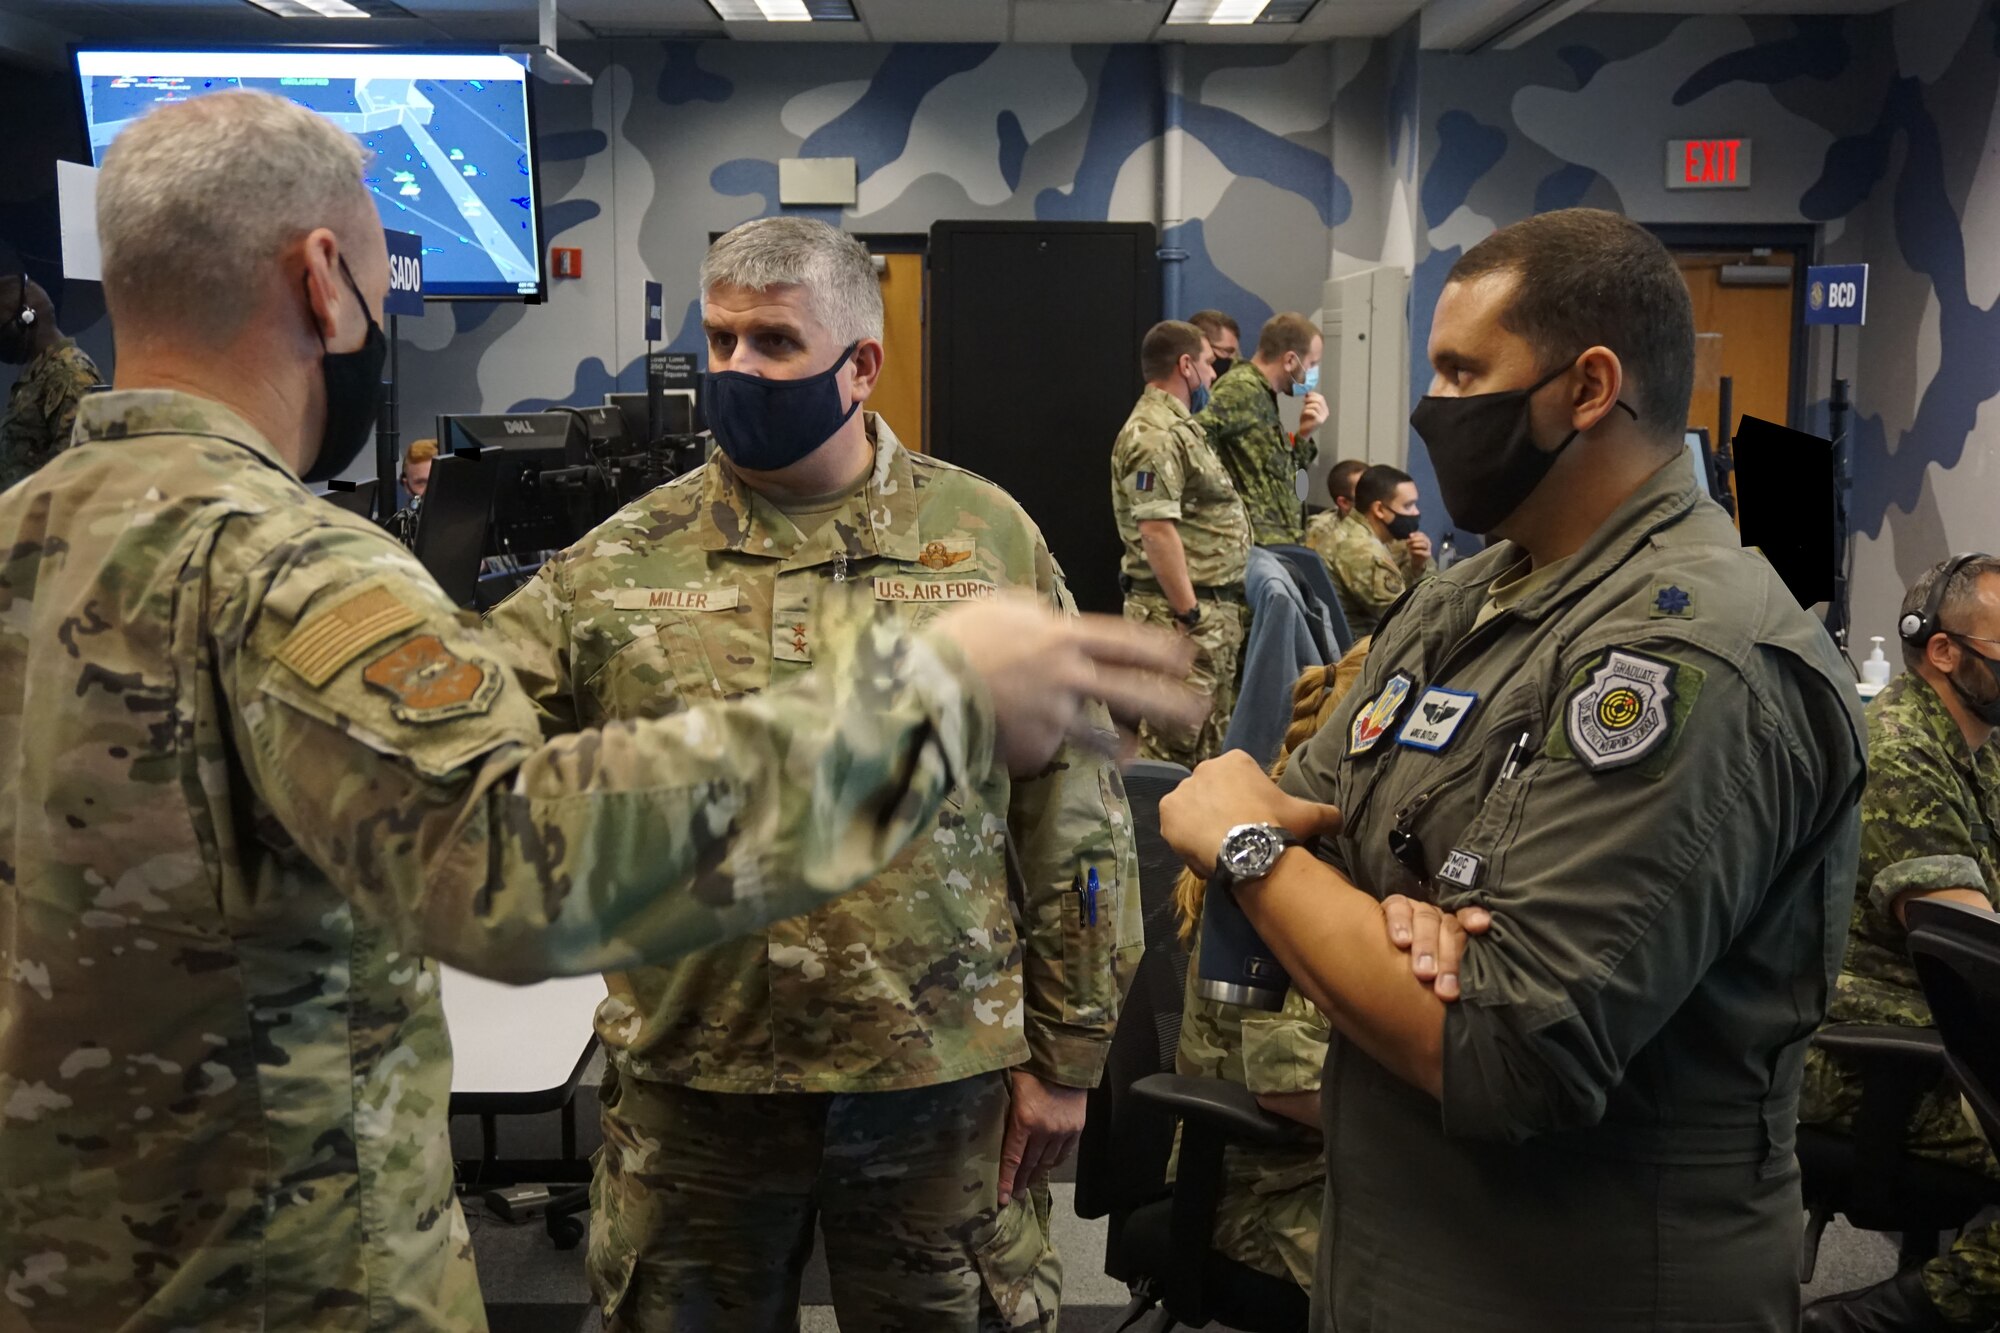 photo of U.S. Airmen briefing DV while coalition forces work on computers in background